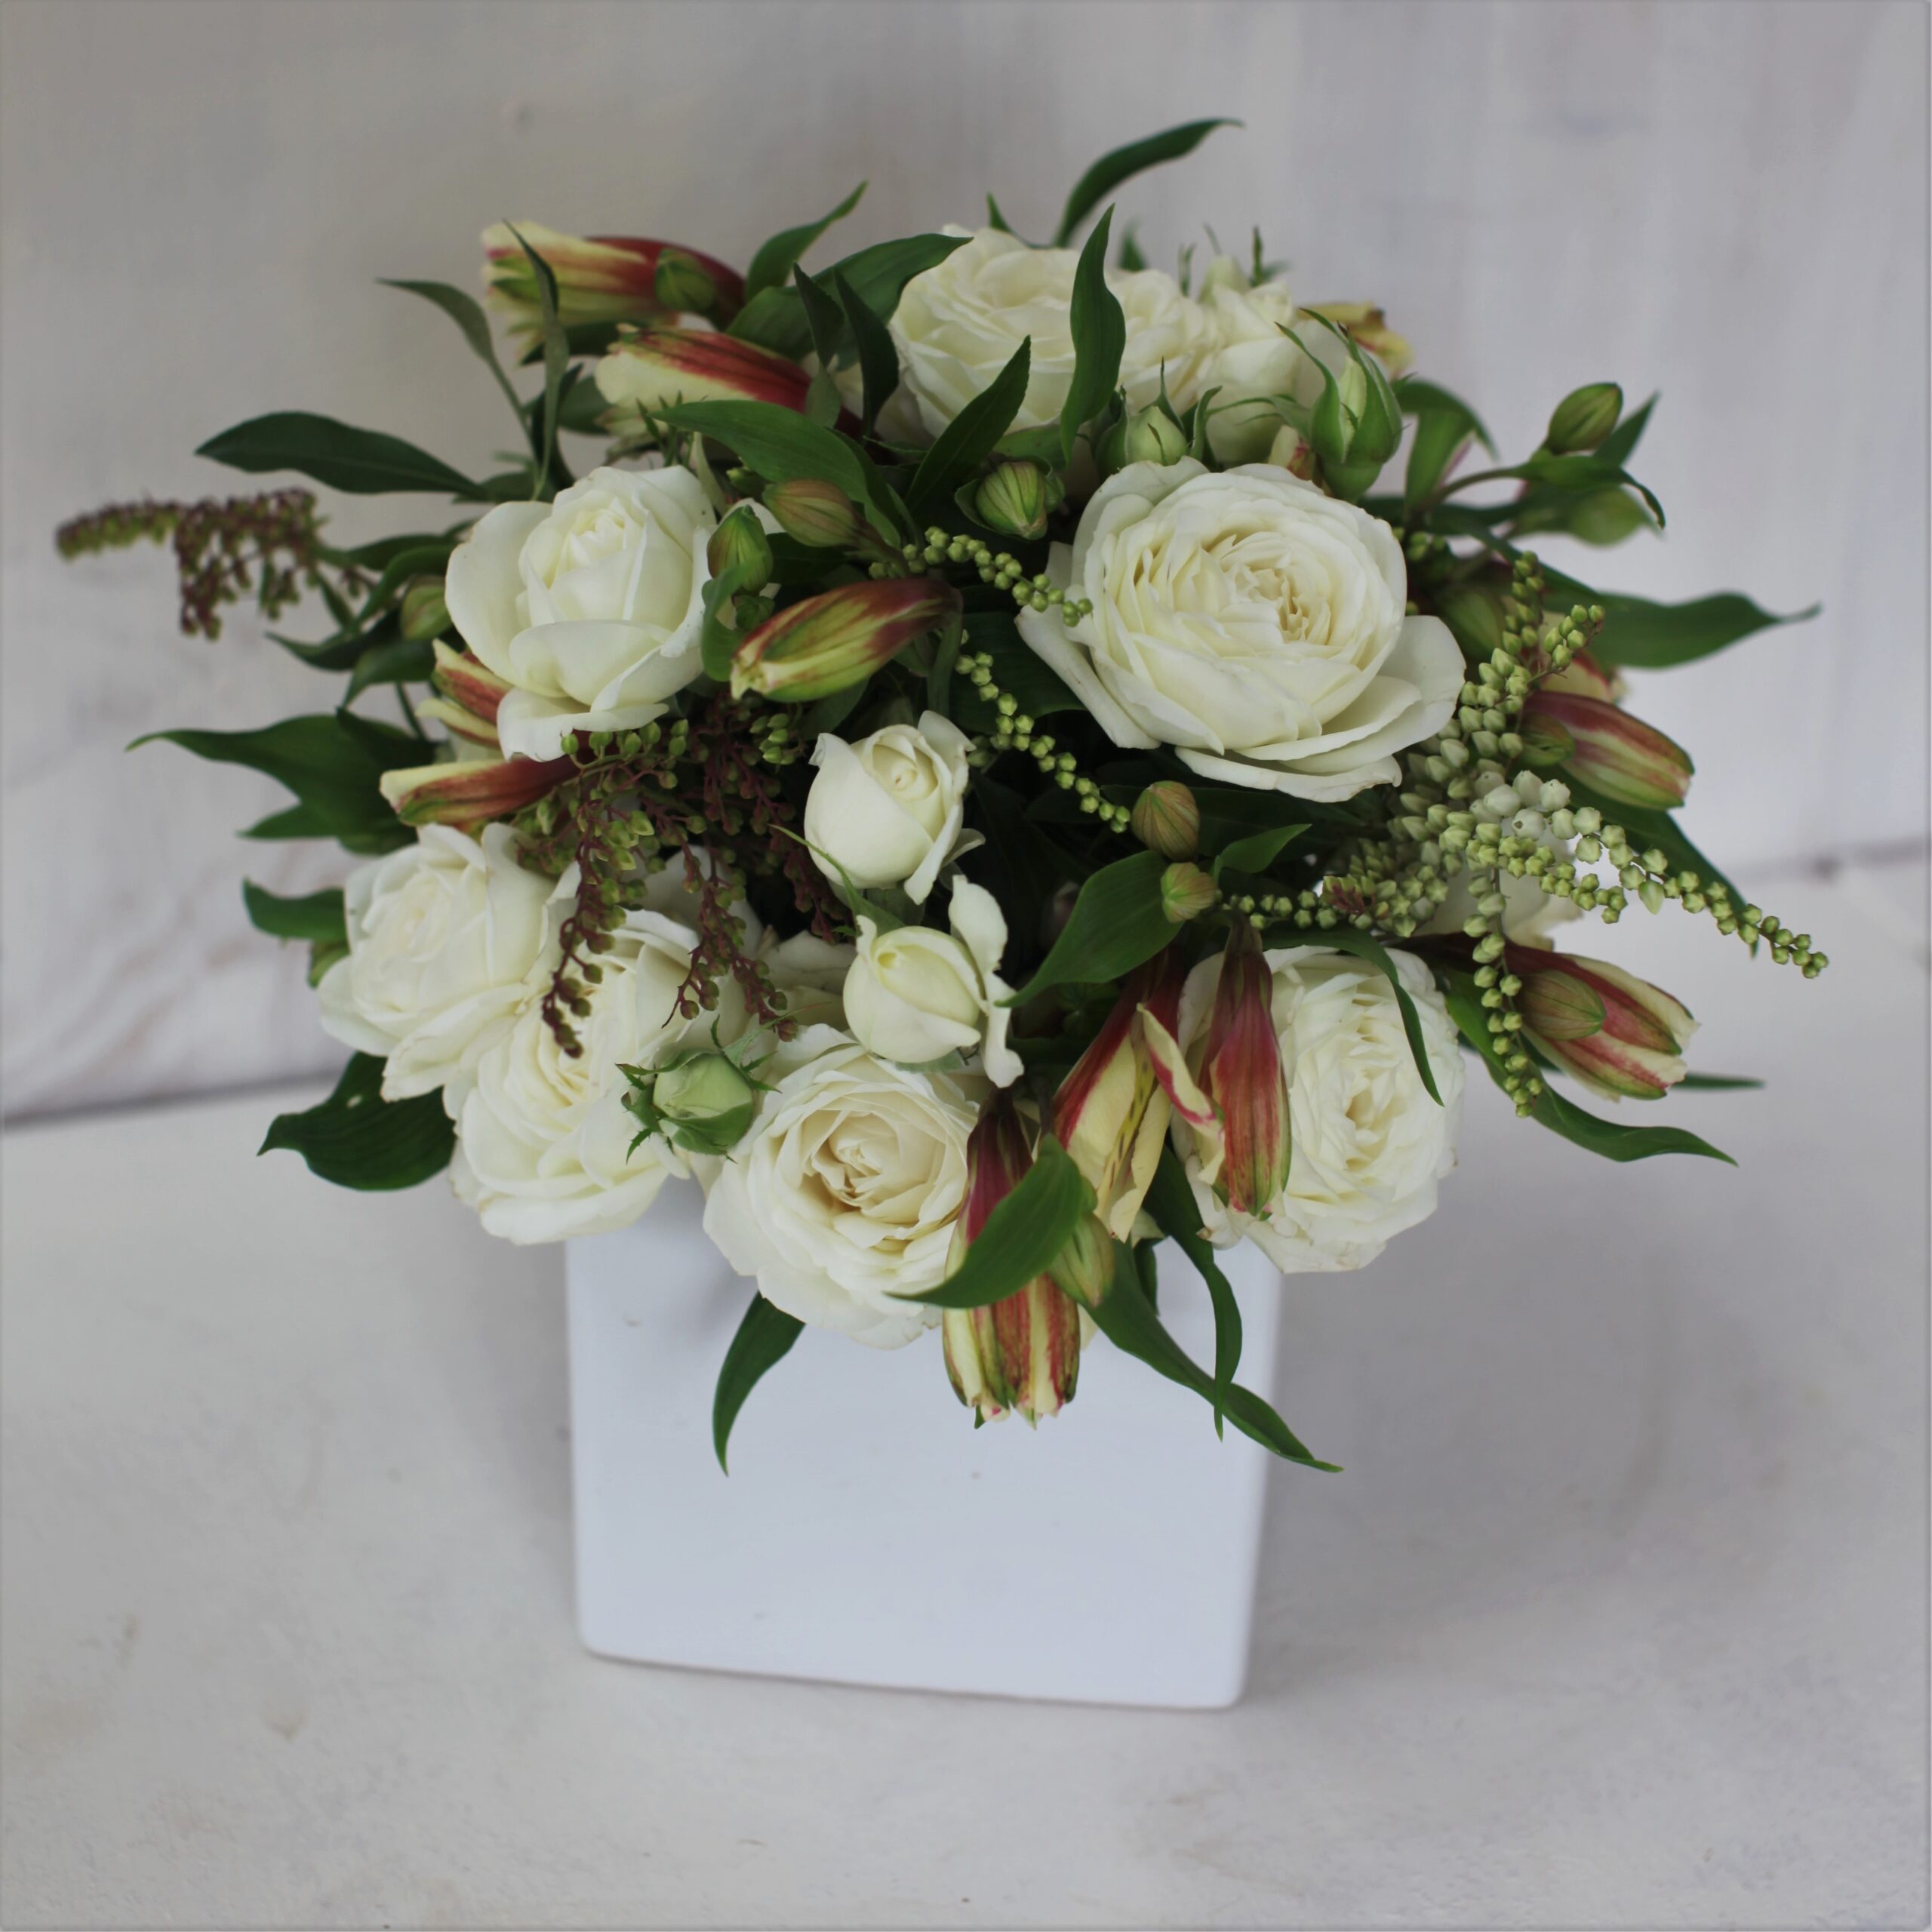 A square white ceramic container is filled with a posy of flowers including alstroemeria and roses.